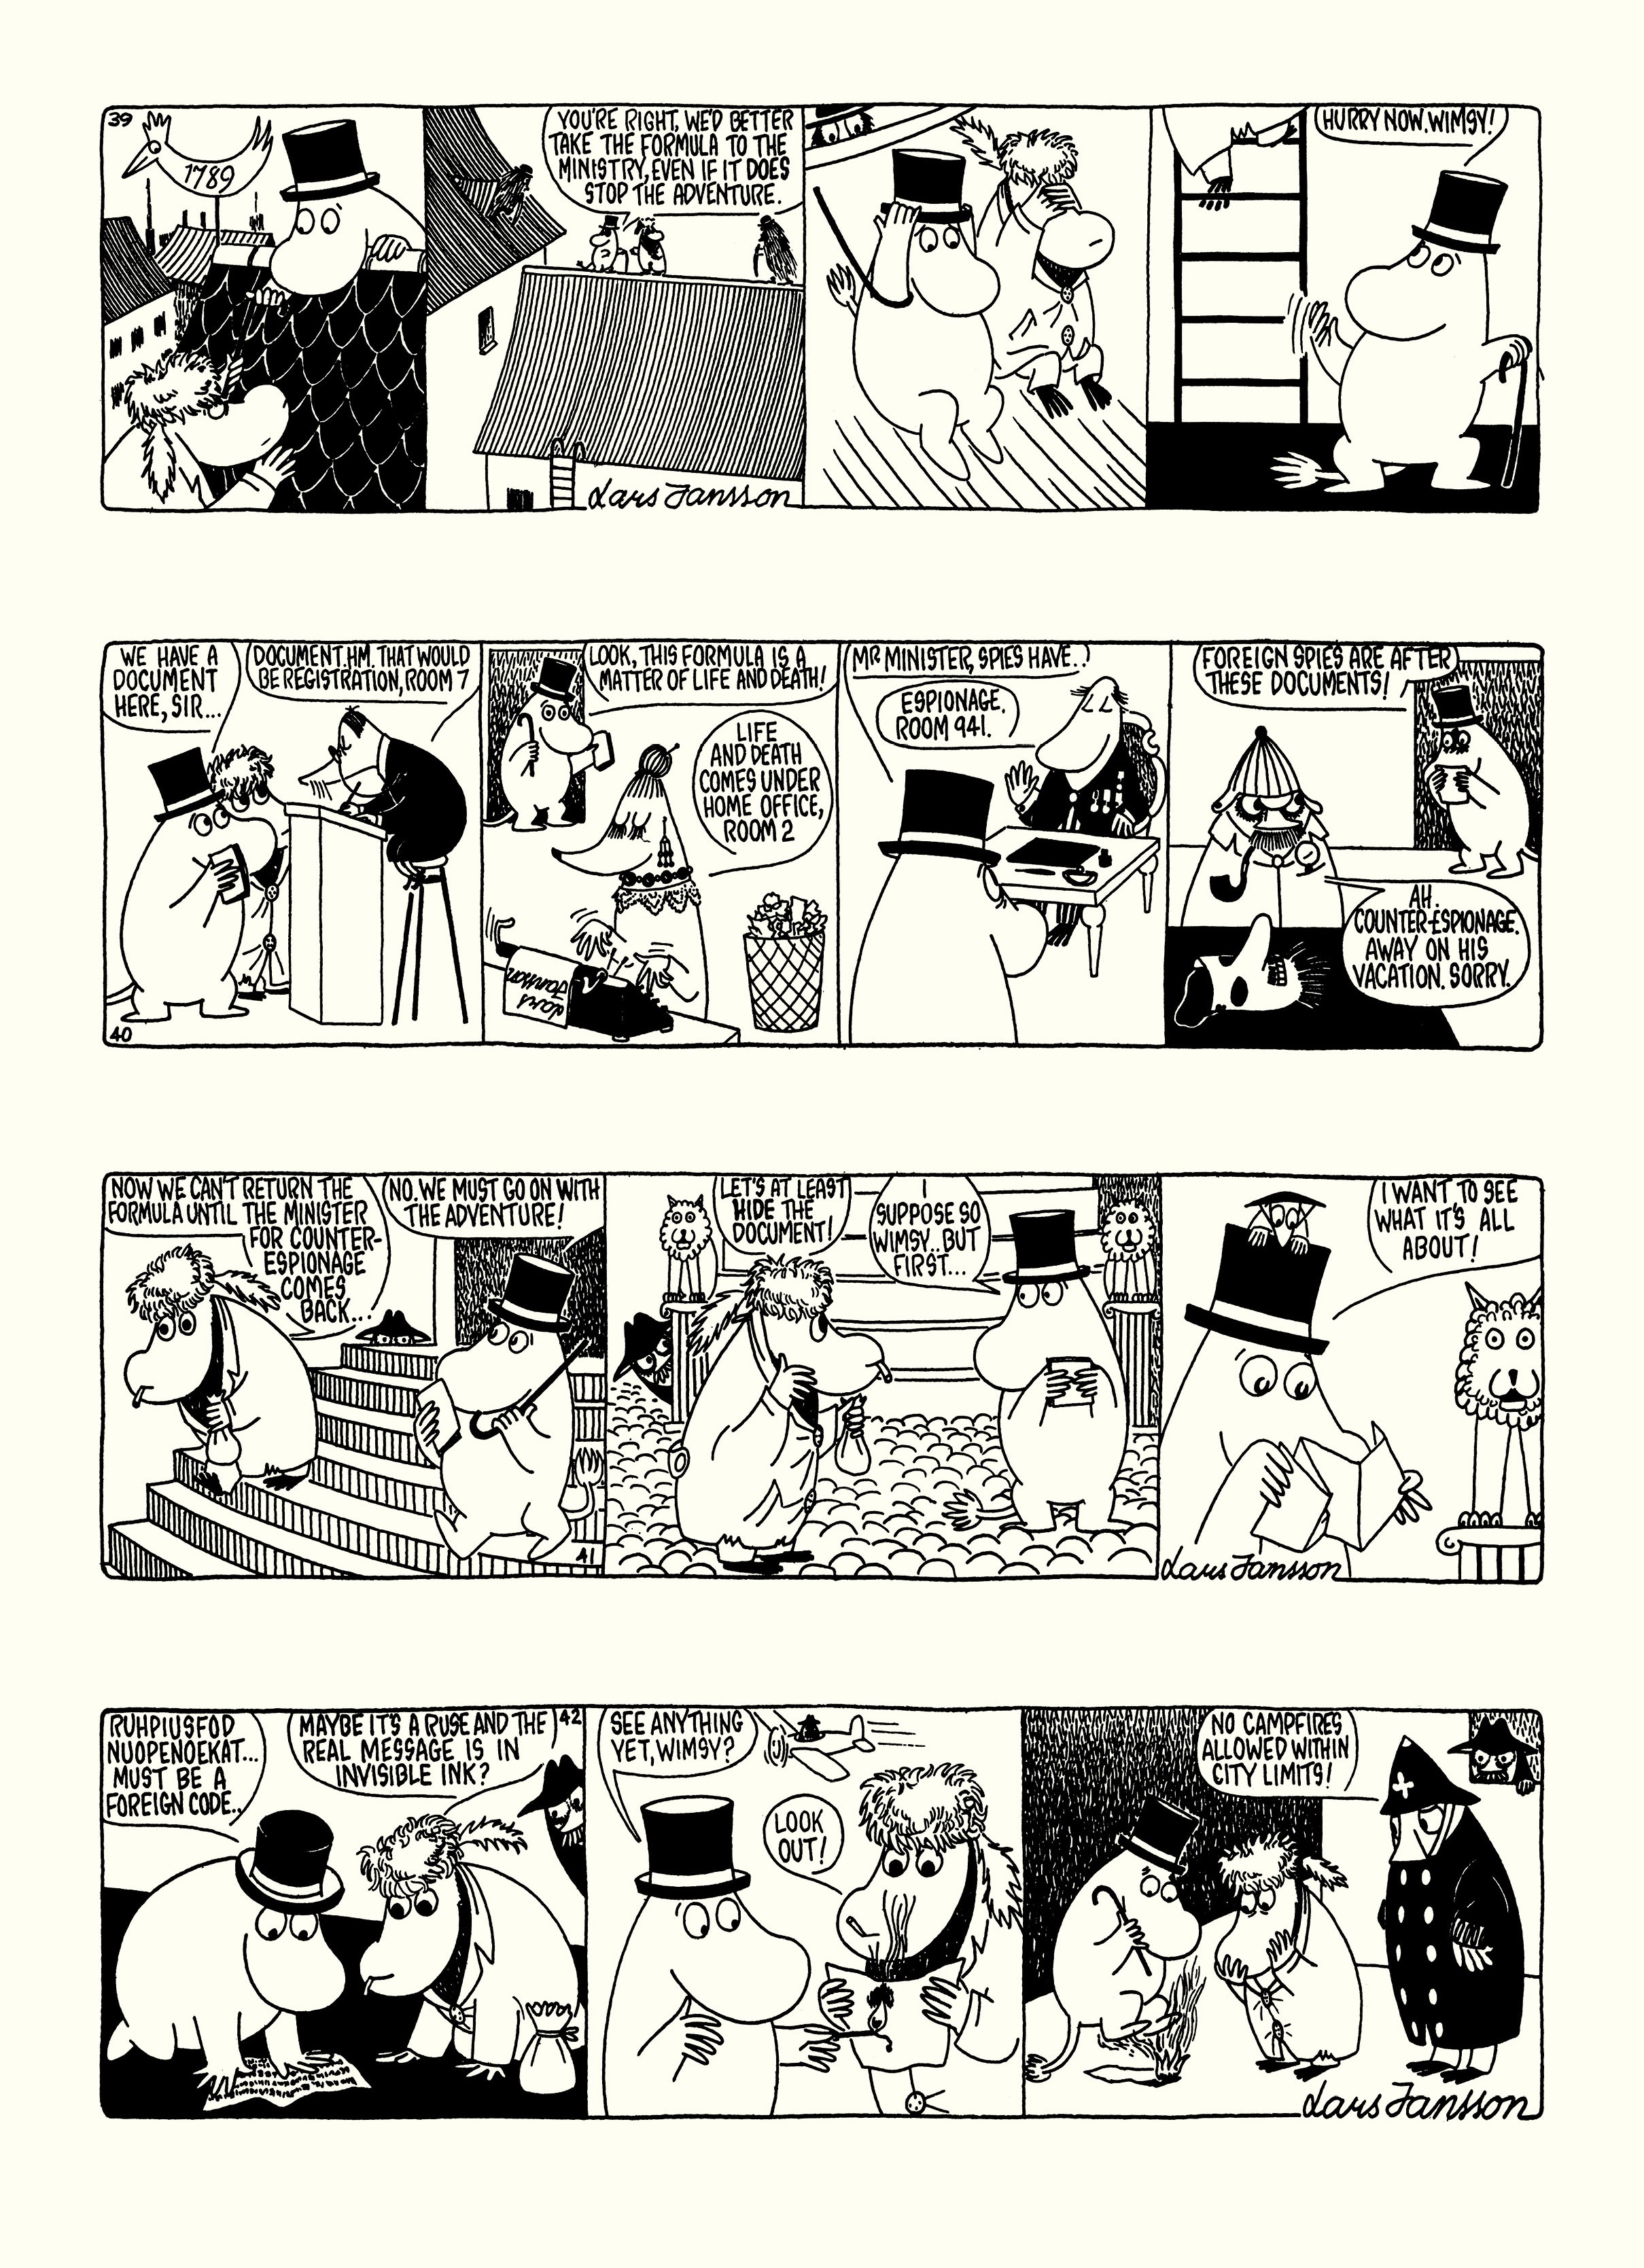 Read online Moomin: The Complete Lars Jansson Comic Strip comic -  Issue # TPB 6 - 57